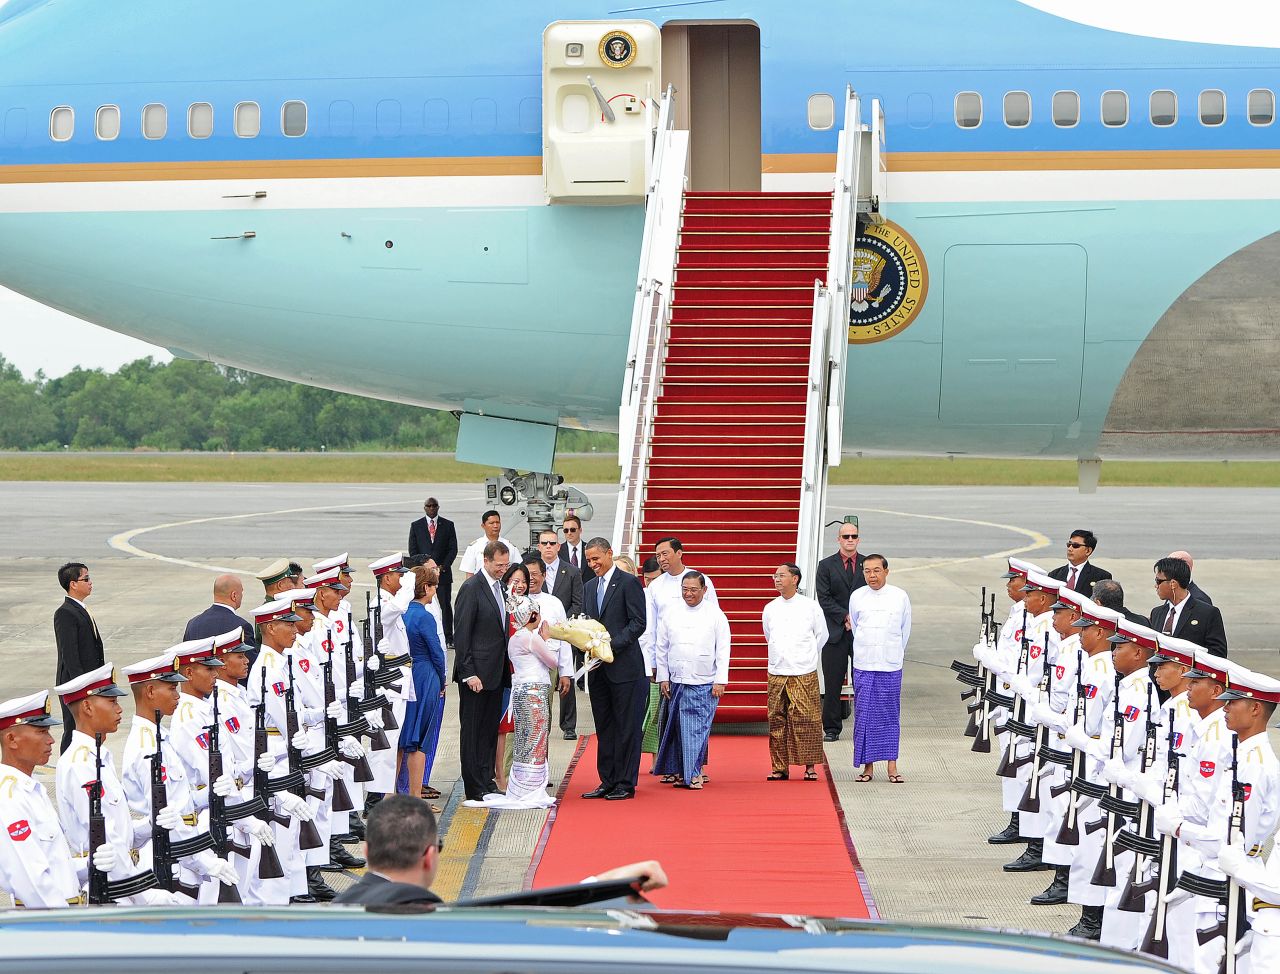 U.S. President Obama is greeted by a contingent at the Yangon International airport on Monday.